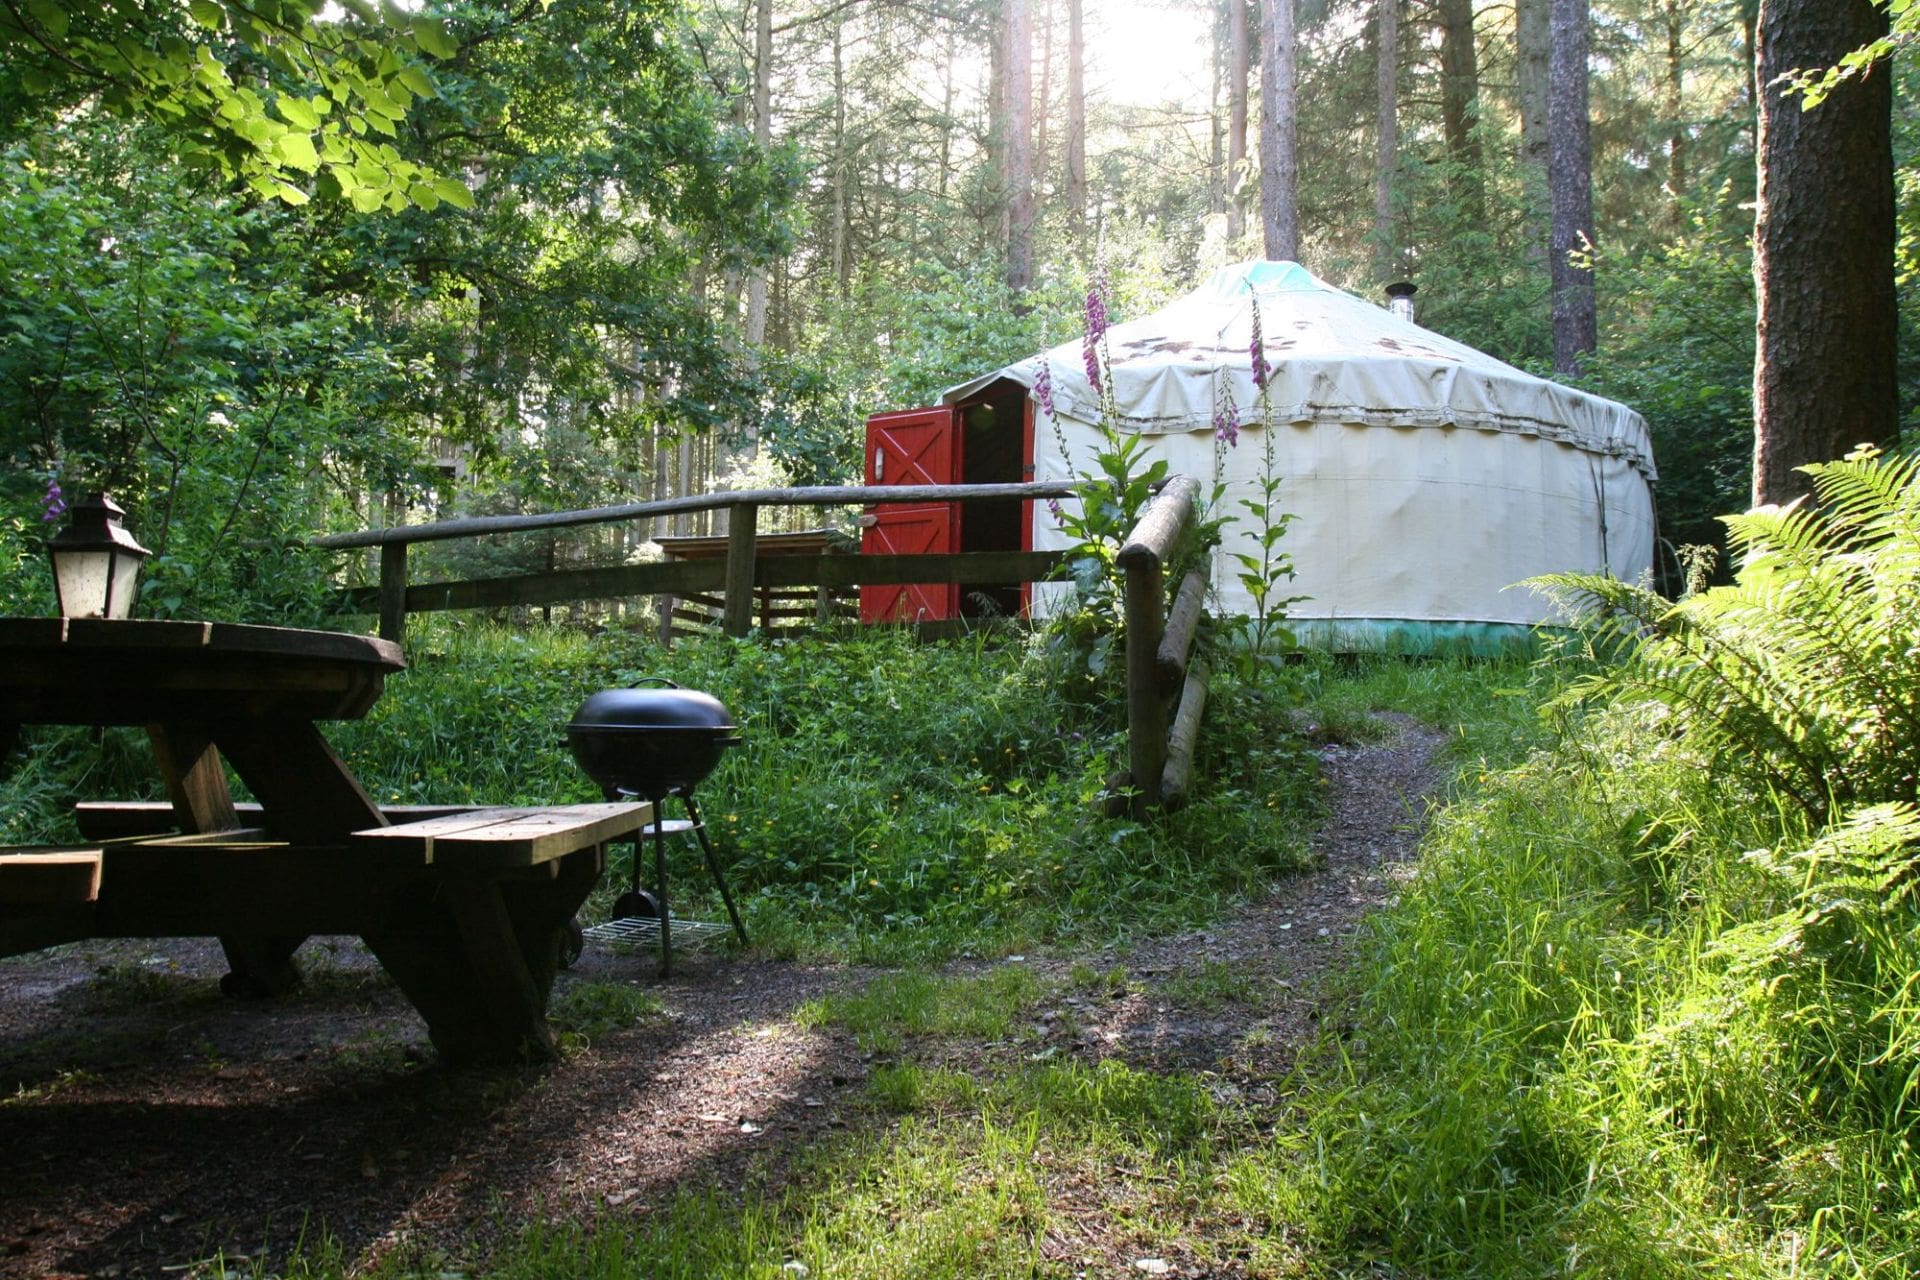 picnic-table-and-bbq-beside-yurt-in-forest-marthrown-of-mabie-yurt-in-dumfries-and-galloway